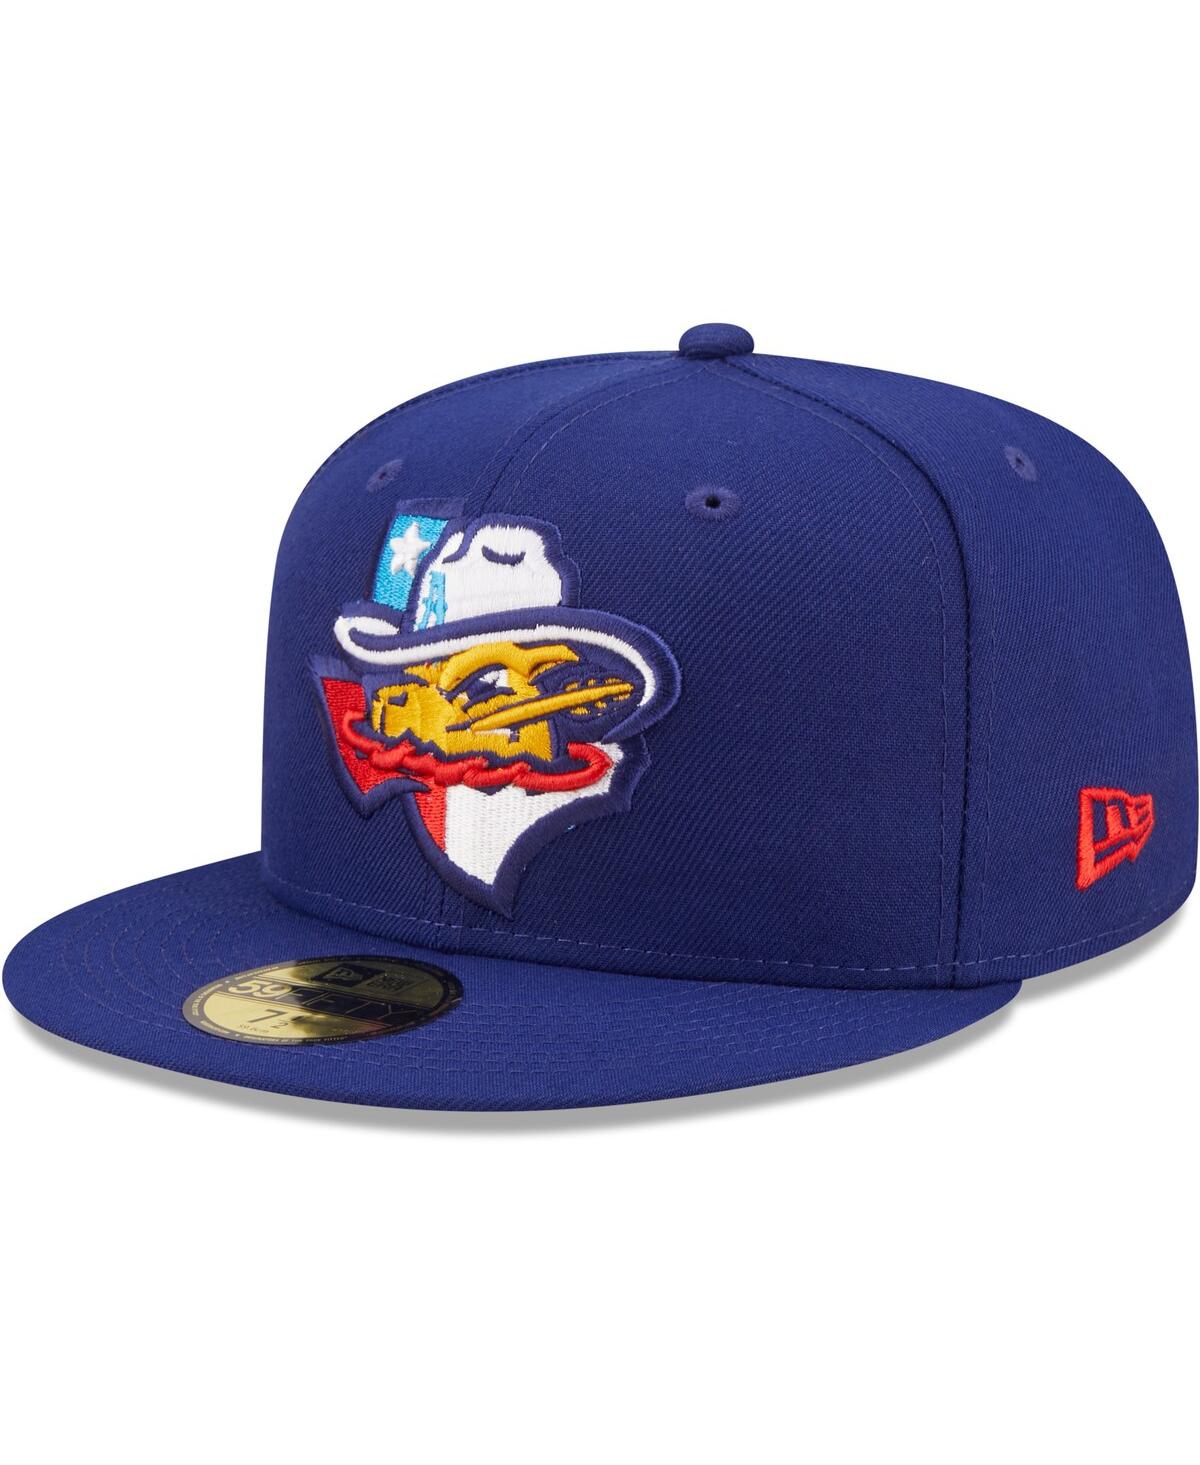 NEW ERA MEN'S NEW ERA ROYAL AMARILLO SOD POODLES AUTHENTIC COLLECTION 59FIFTY FITTED HAT